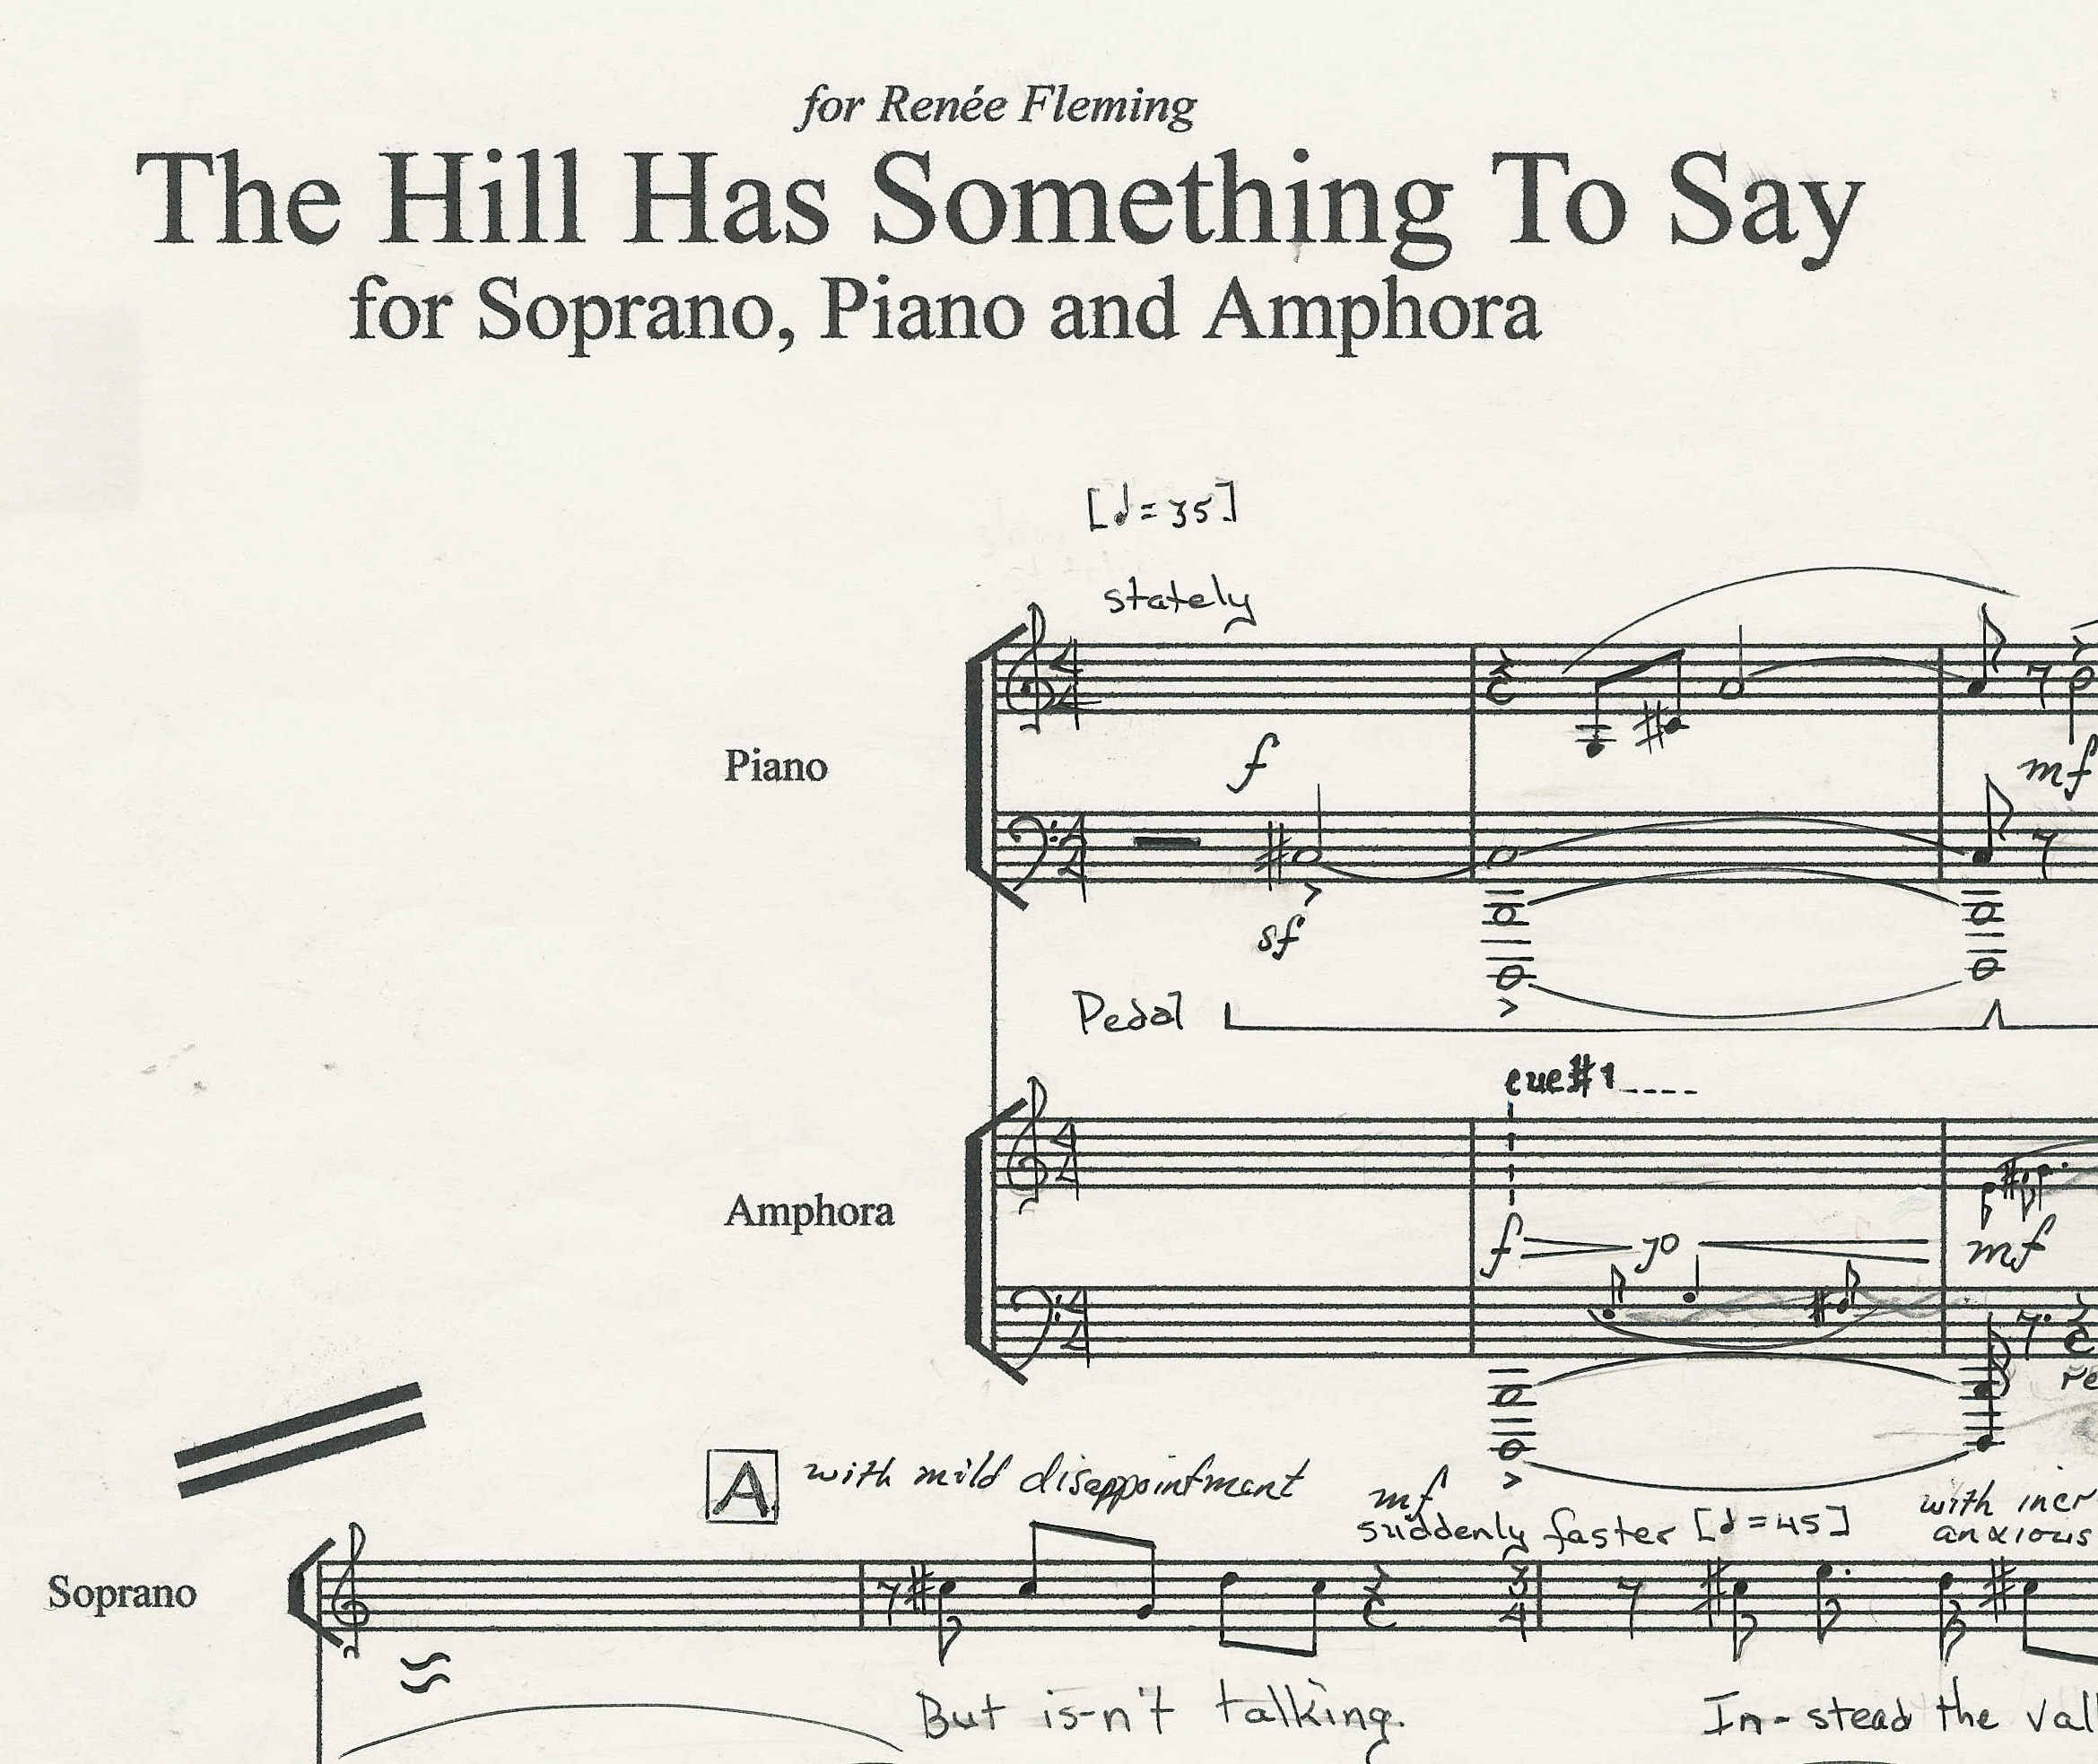 The Hill has Something to Say – the music score for Craig Harris' composition based on a poem by Rita Dove